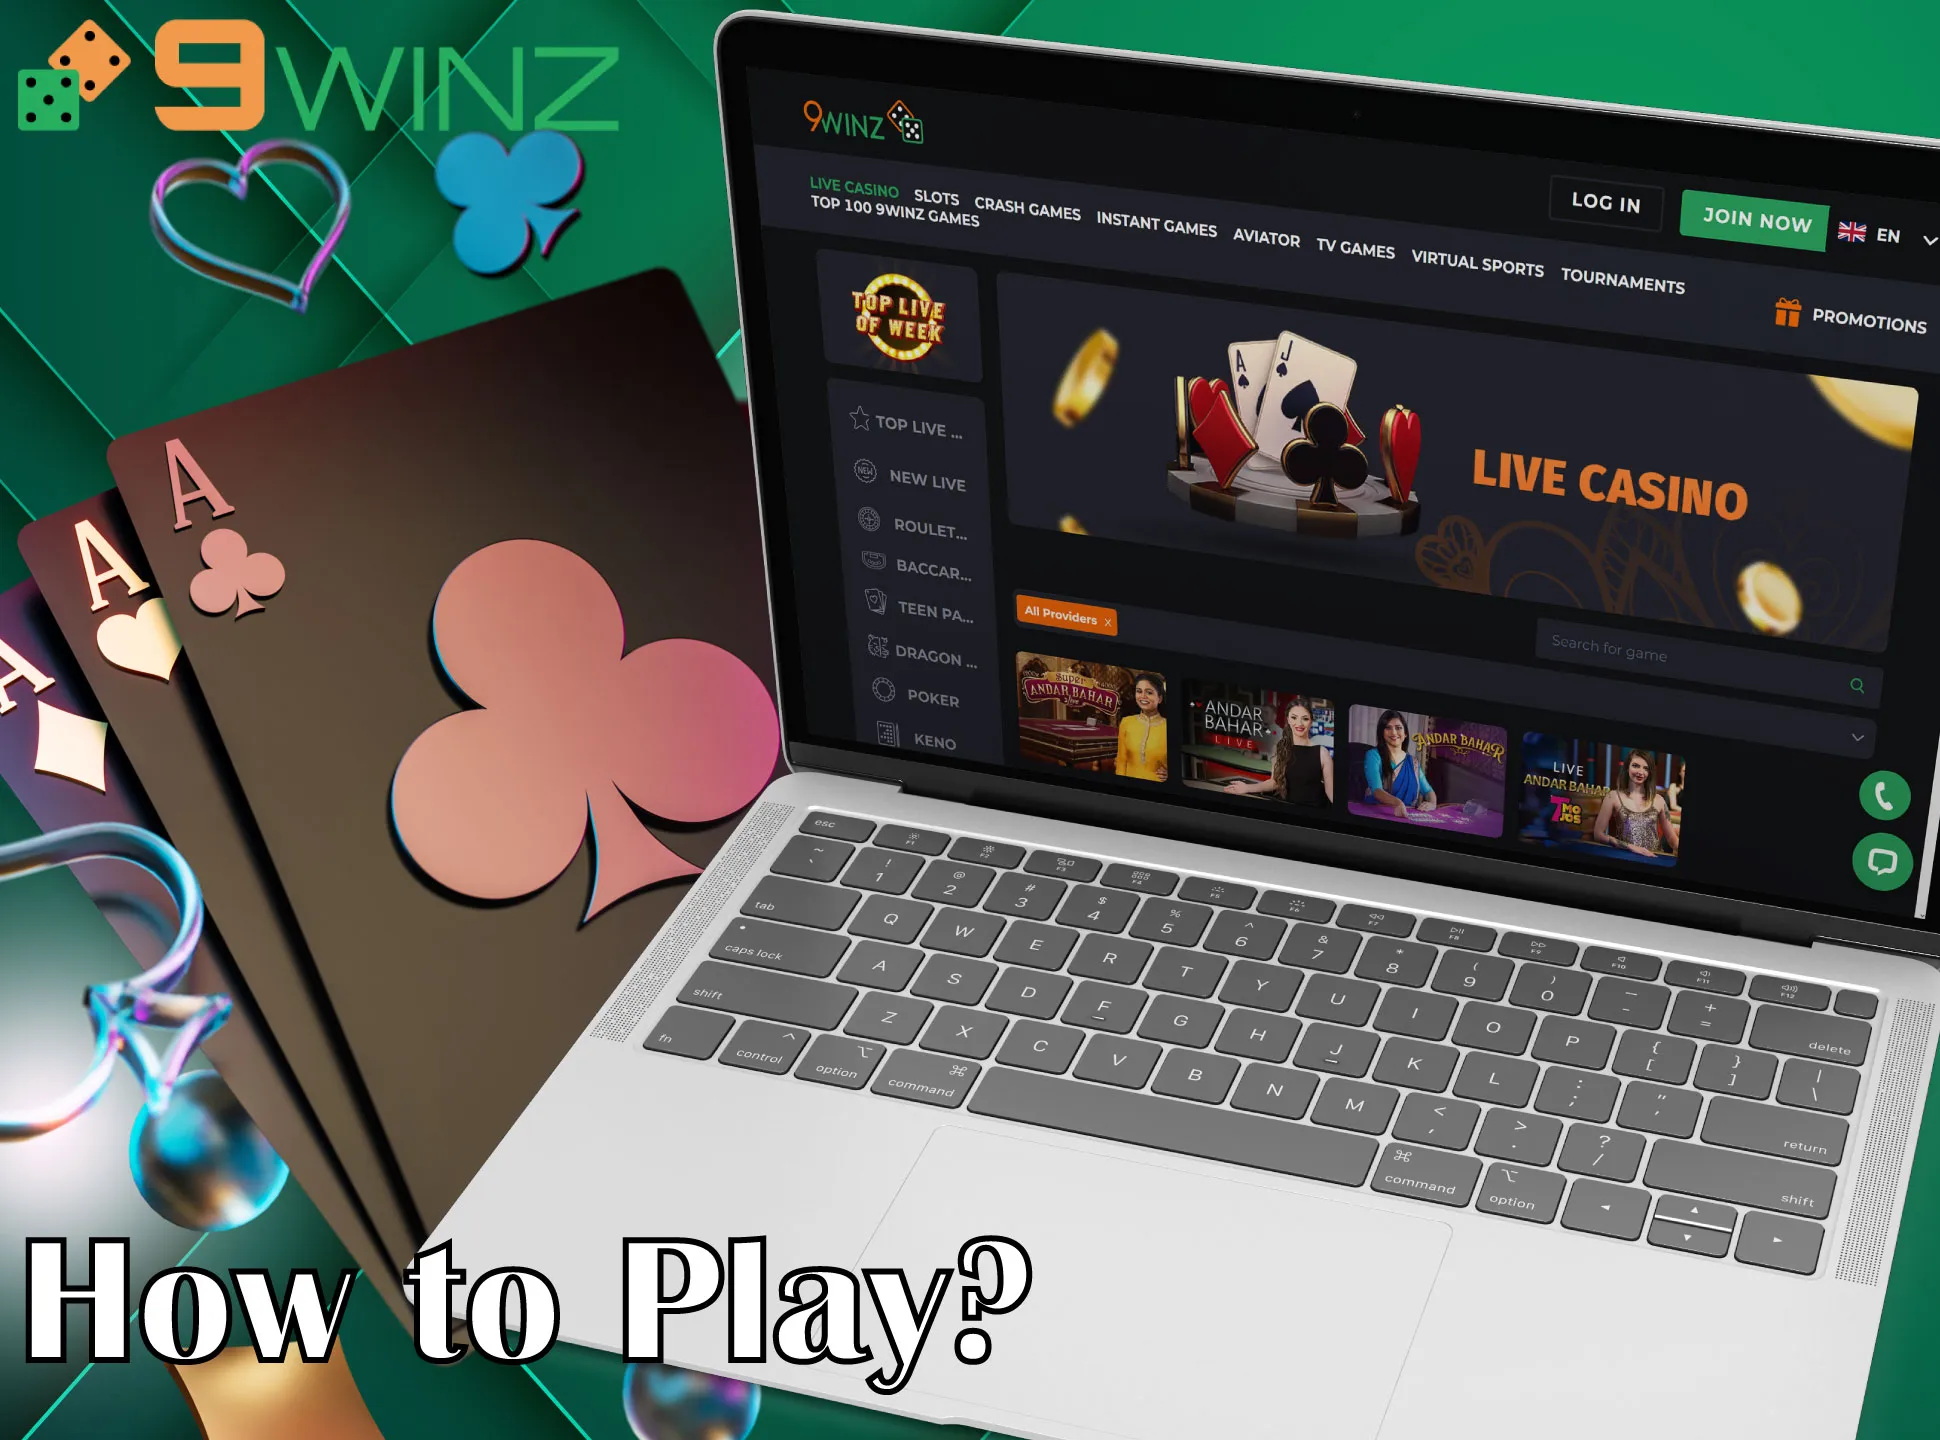 Follow the instruction on how to play Andar Bahar game at 9winz Casino and win.